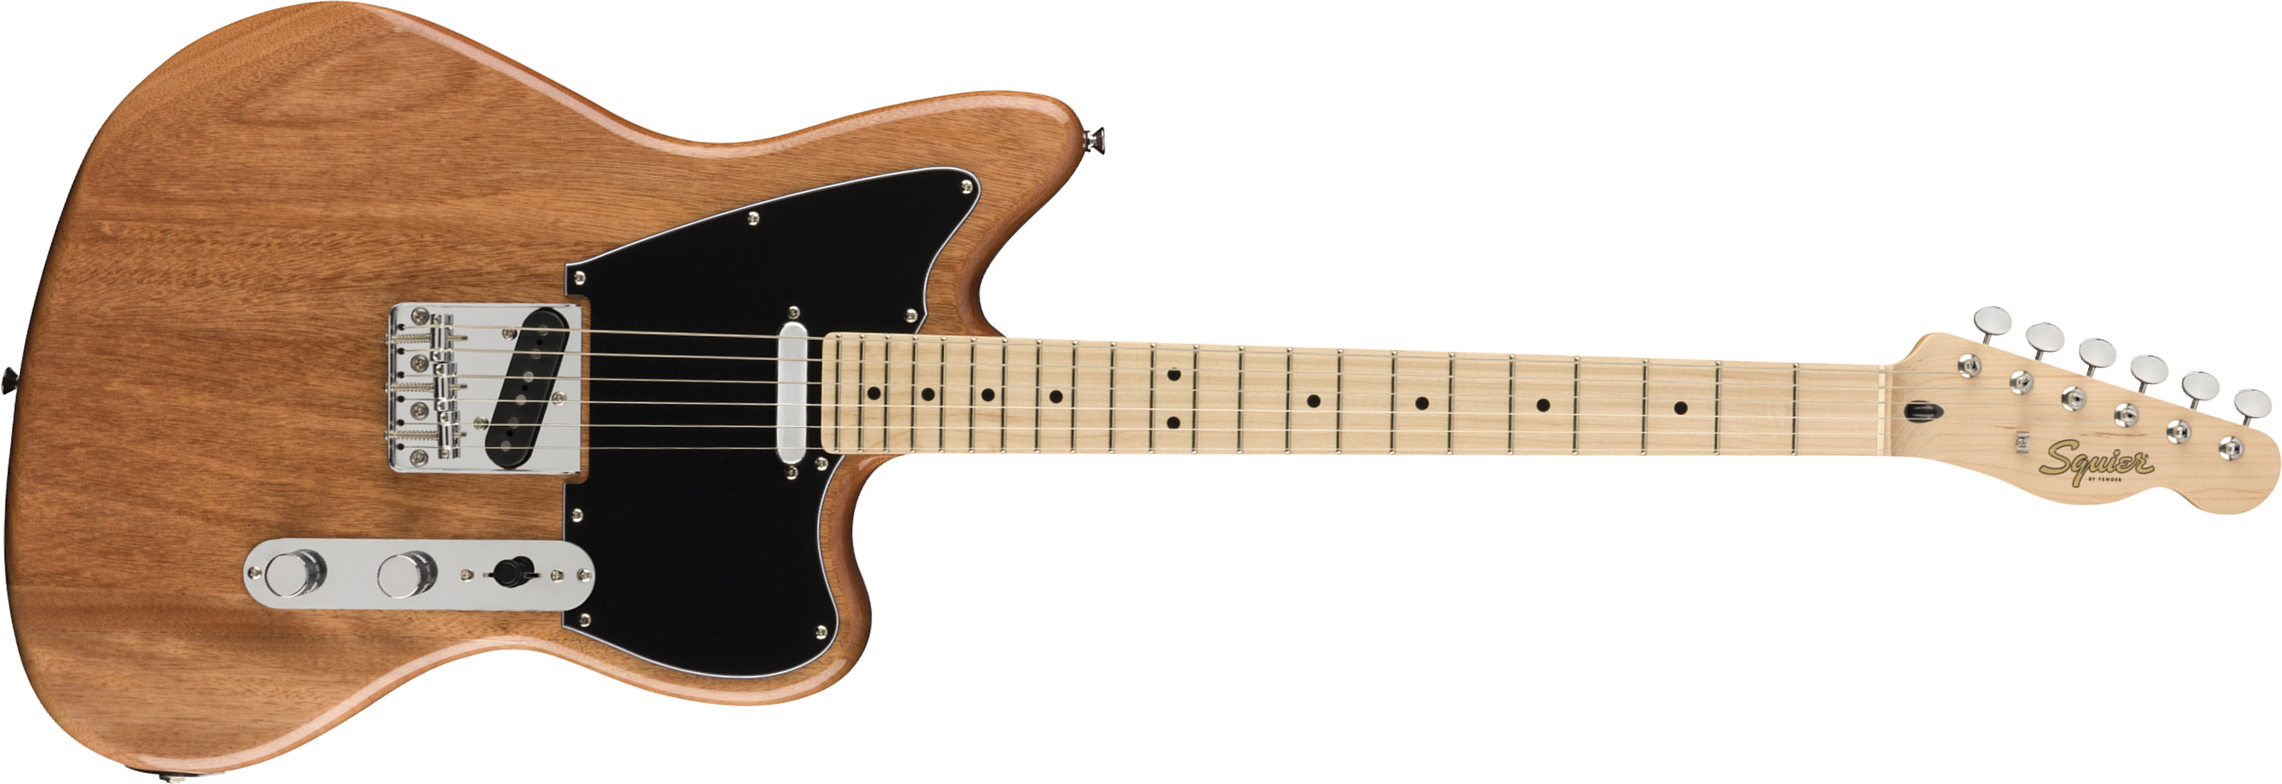 Squier Tele Offset Paranormal Ss Ht Mn - Natural - Guitarra electrica retro rock - Main picture